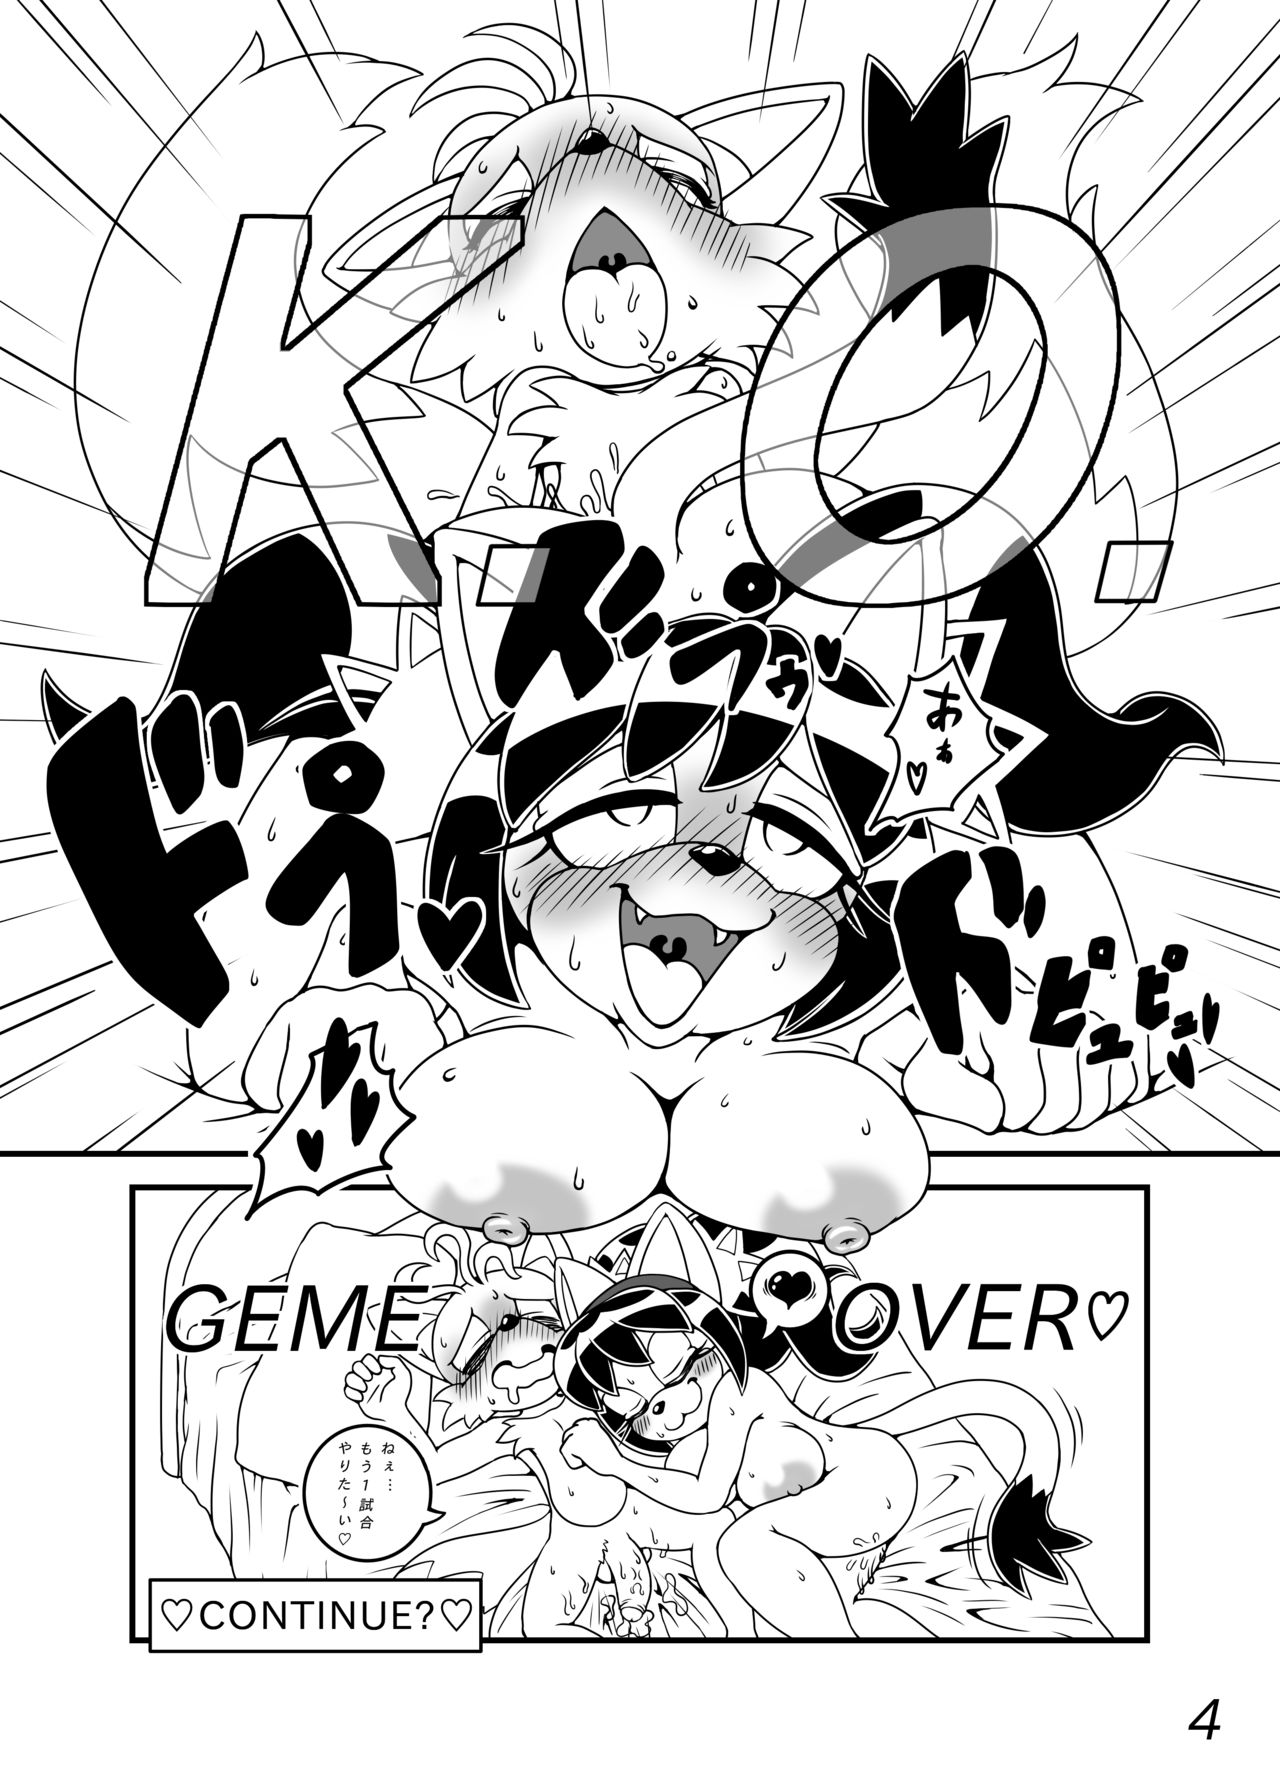 Tailas Sex - Tails vs Honey sex battle! - Page 4 - HentaiEra